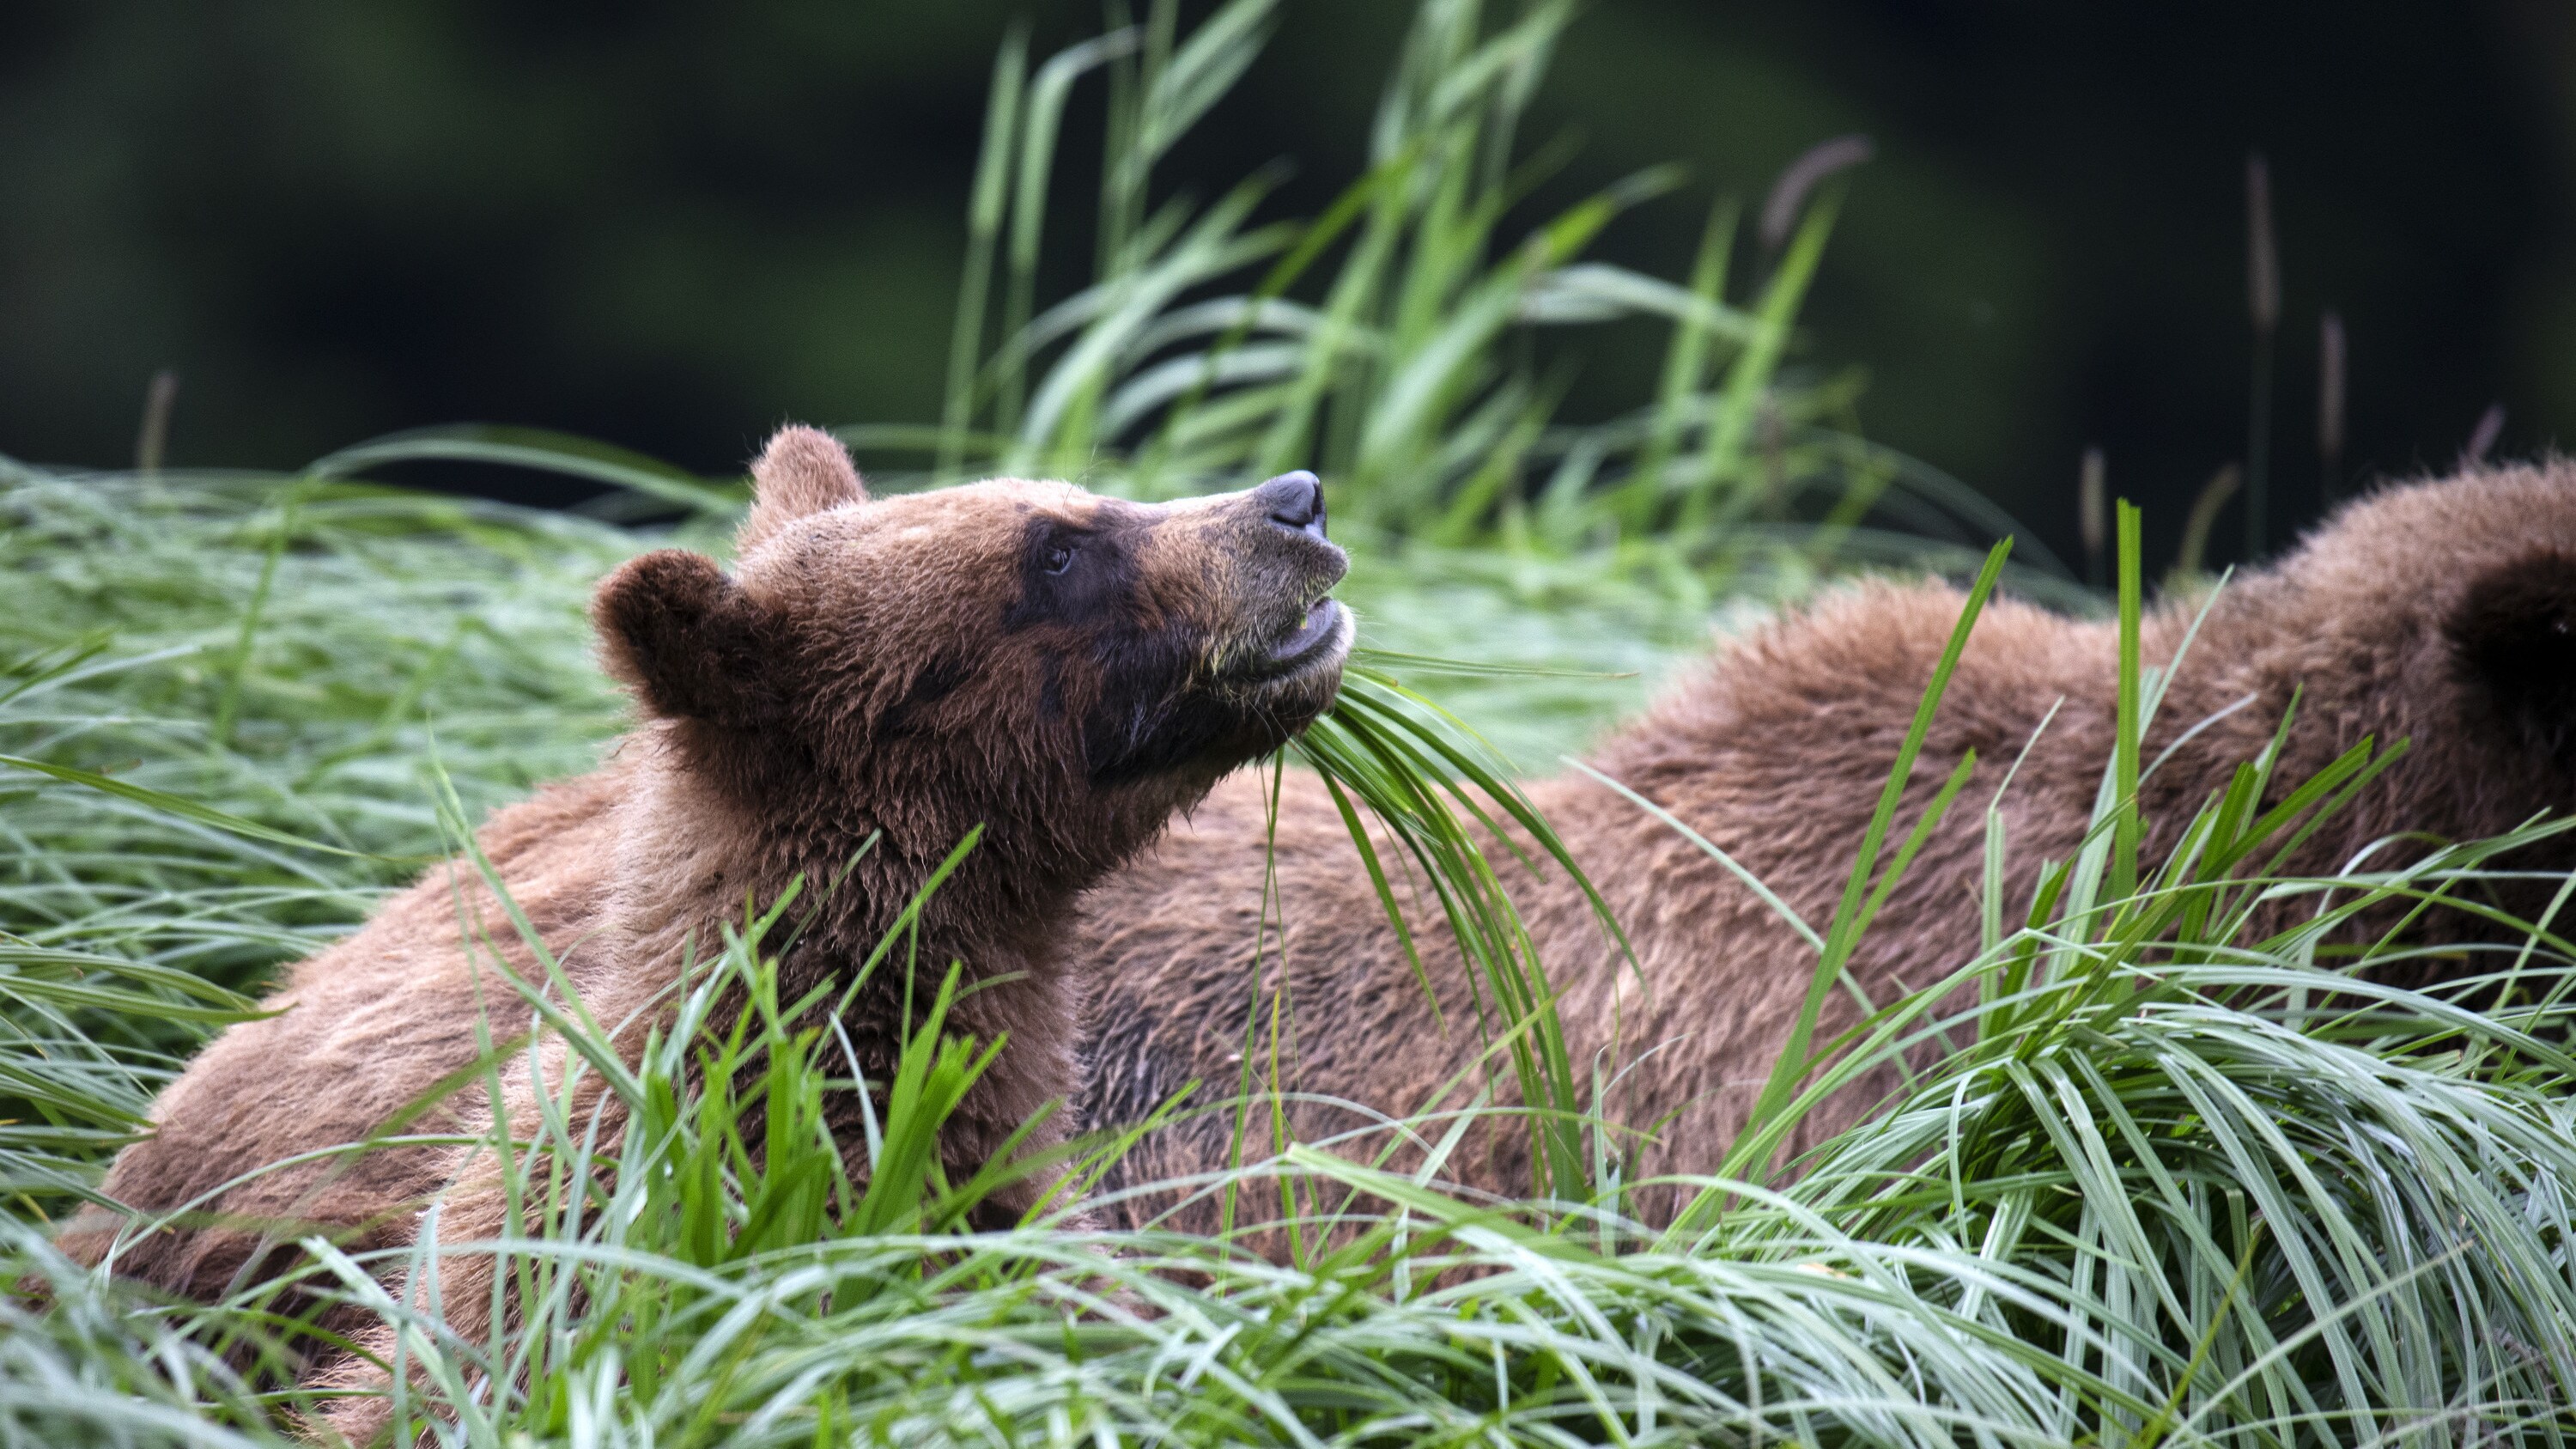 A grizzly bear cub eating sedge. (National Geographic for Disney+/Matthew Hood)